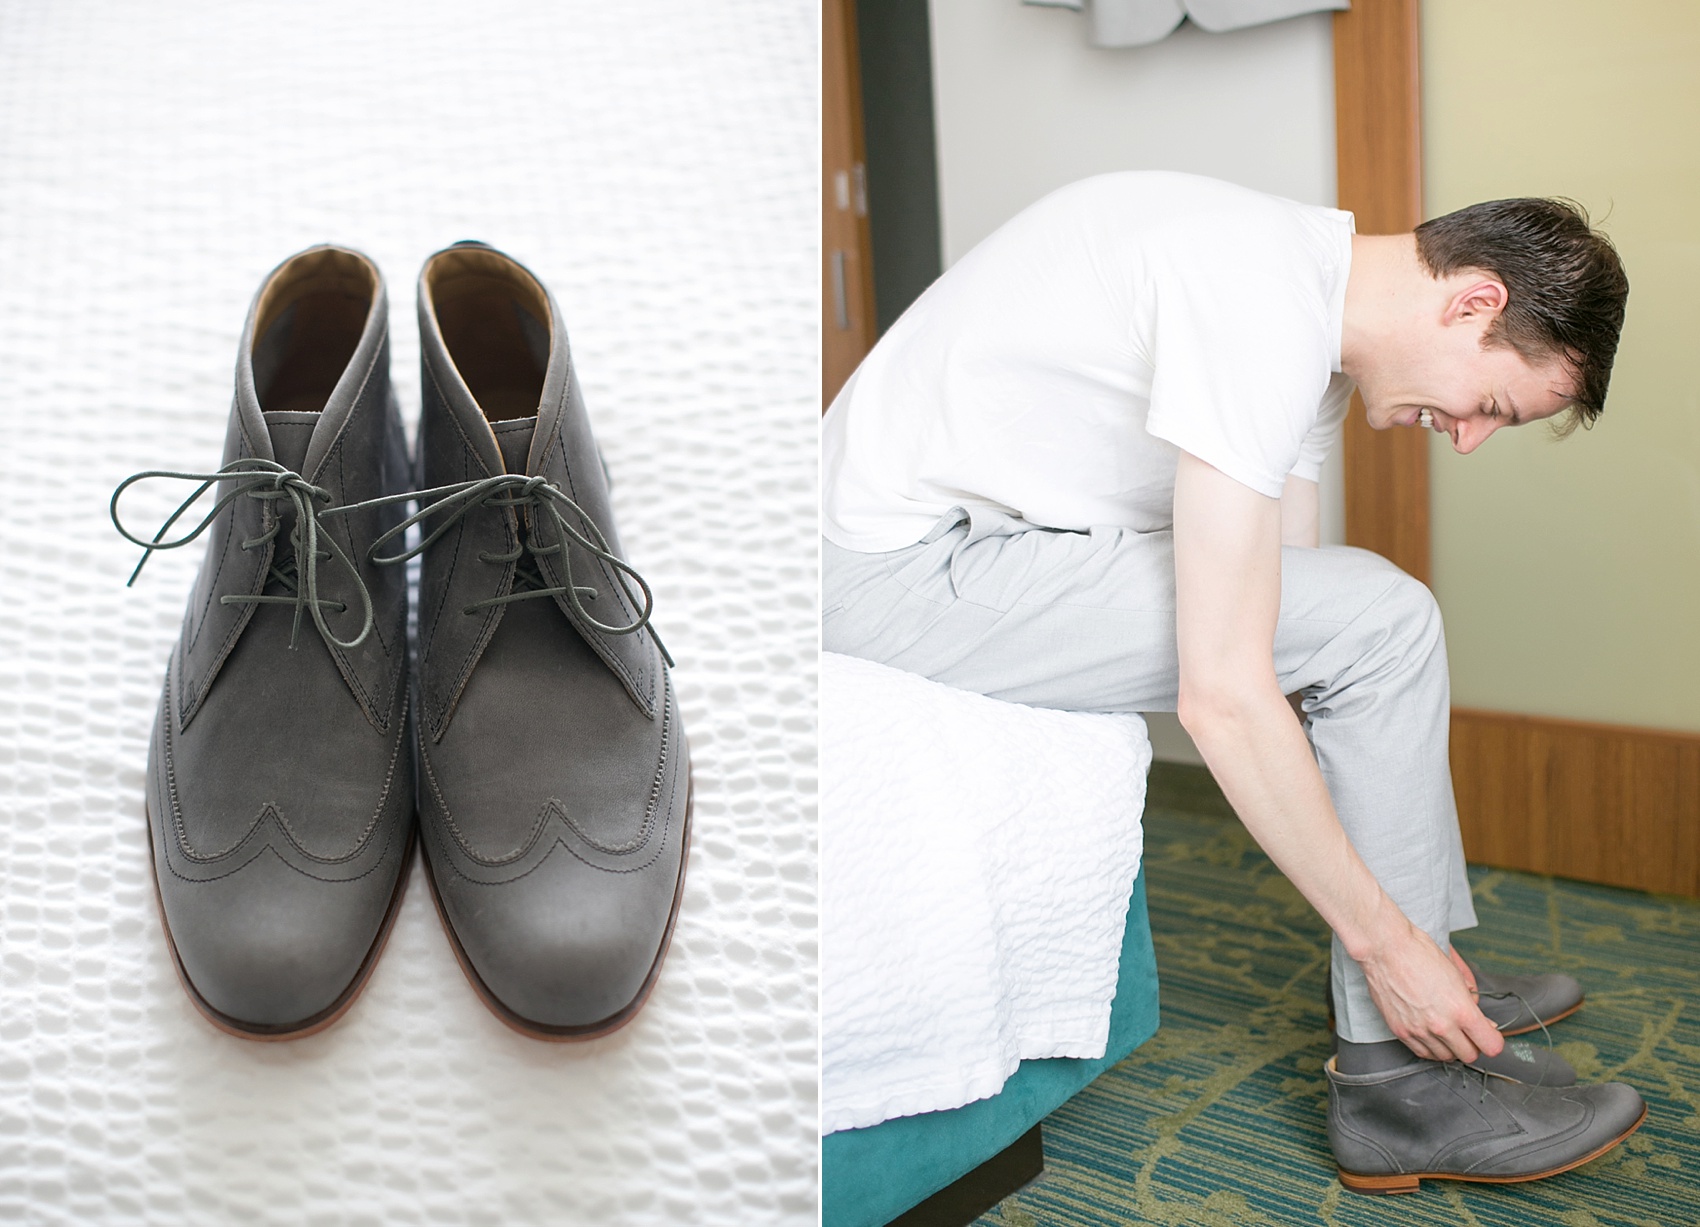 The groom prepares in his J. Crew suit for a summer vineyard wedding at Hopewell Valley Vineyards. Photos by New Jersey wedding photographer, Mikkel Paige Photography.